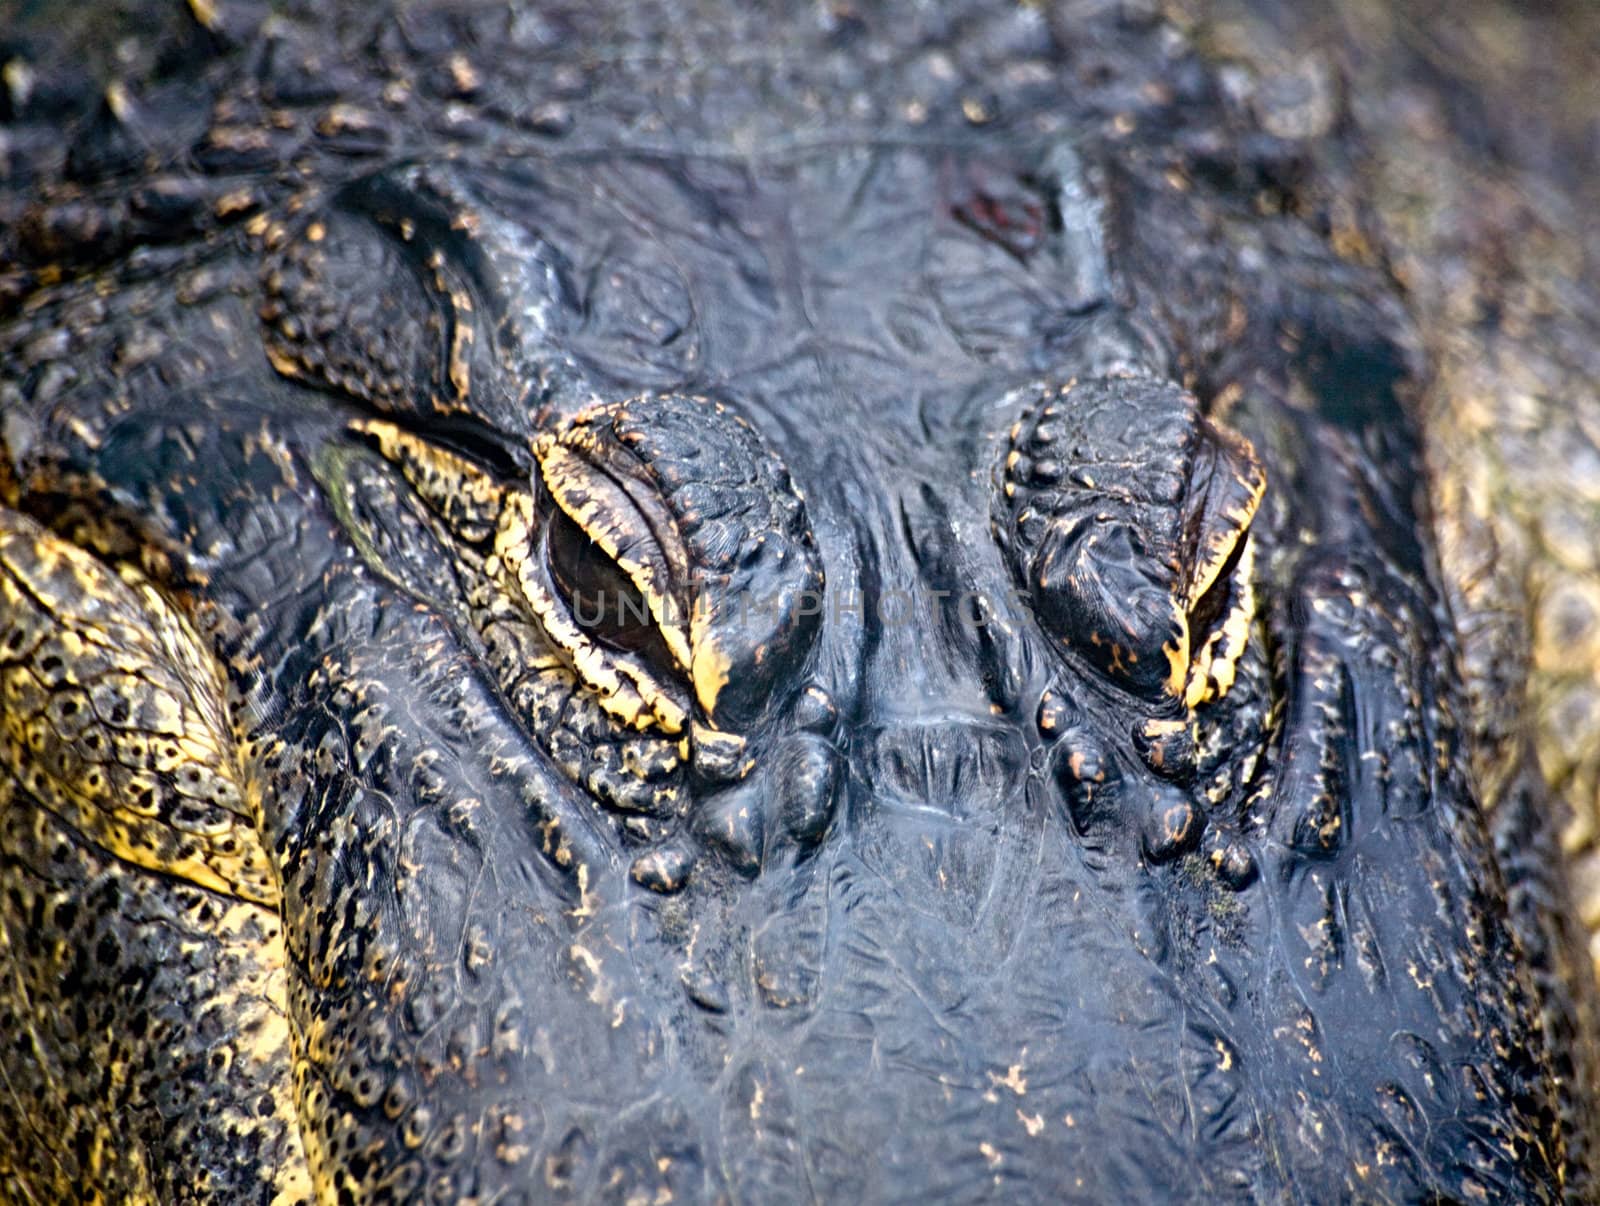 A close up of the eyes and head of an alligator